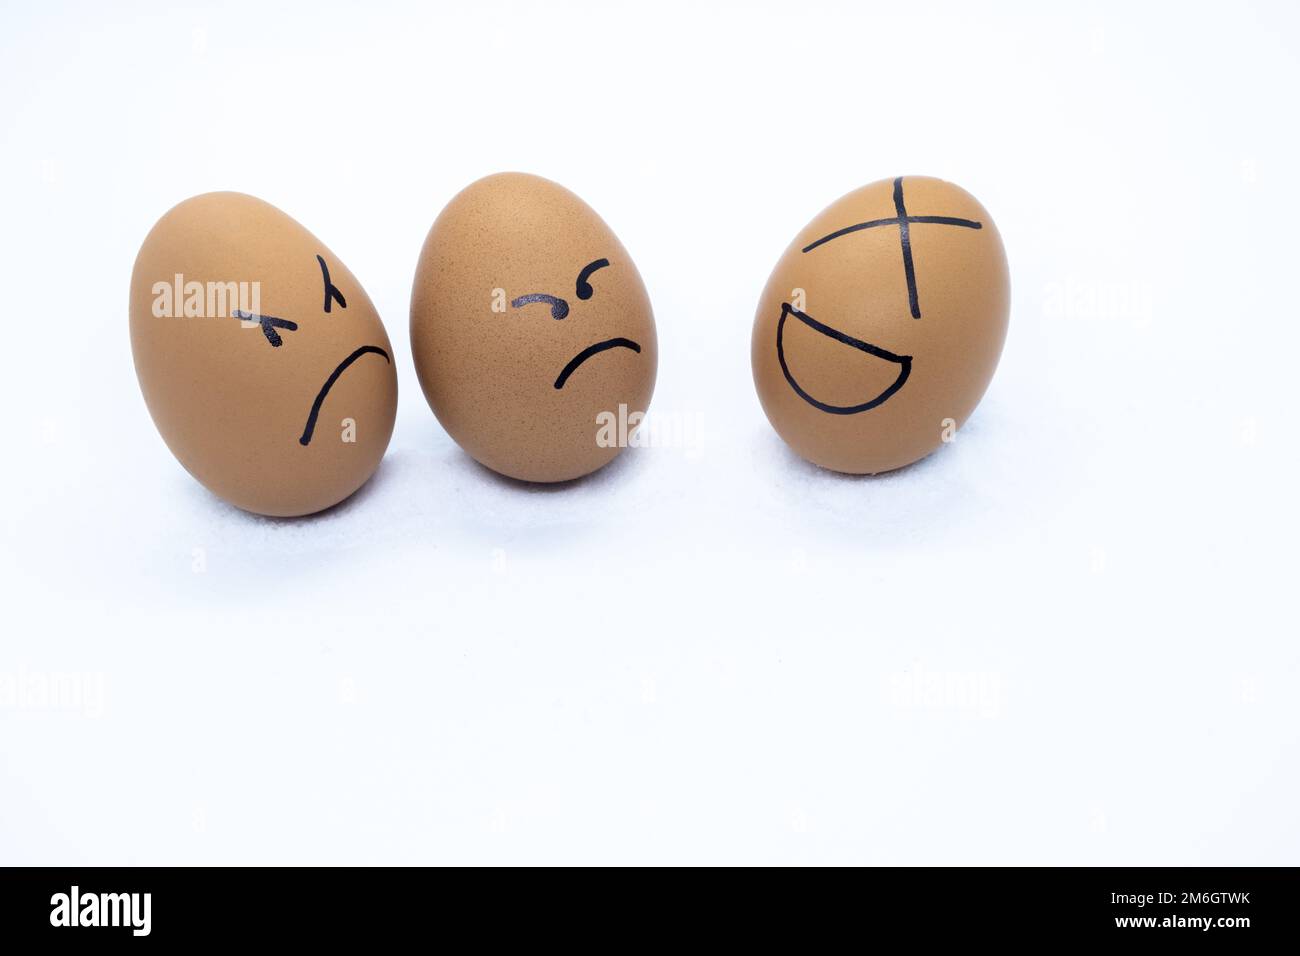 Two angry eggs watching an egg laughing Stock Photo